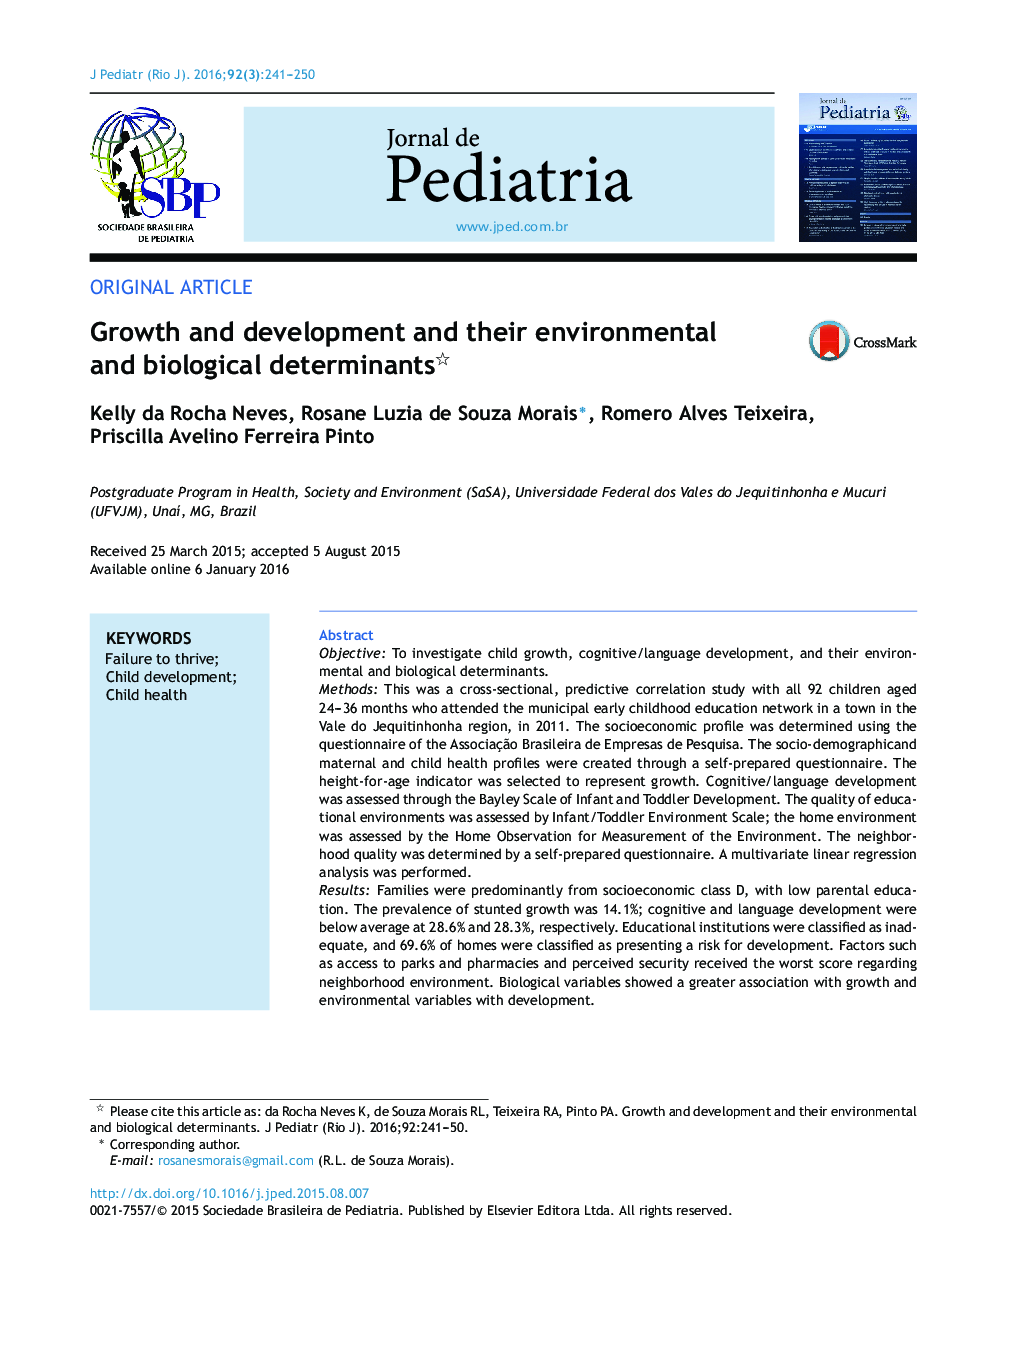 Growth and development and their environmental and biological determinants 